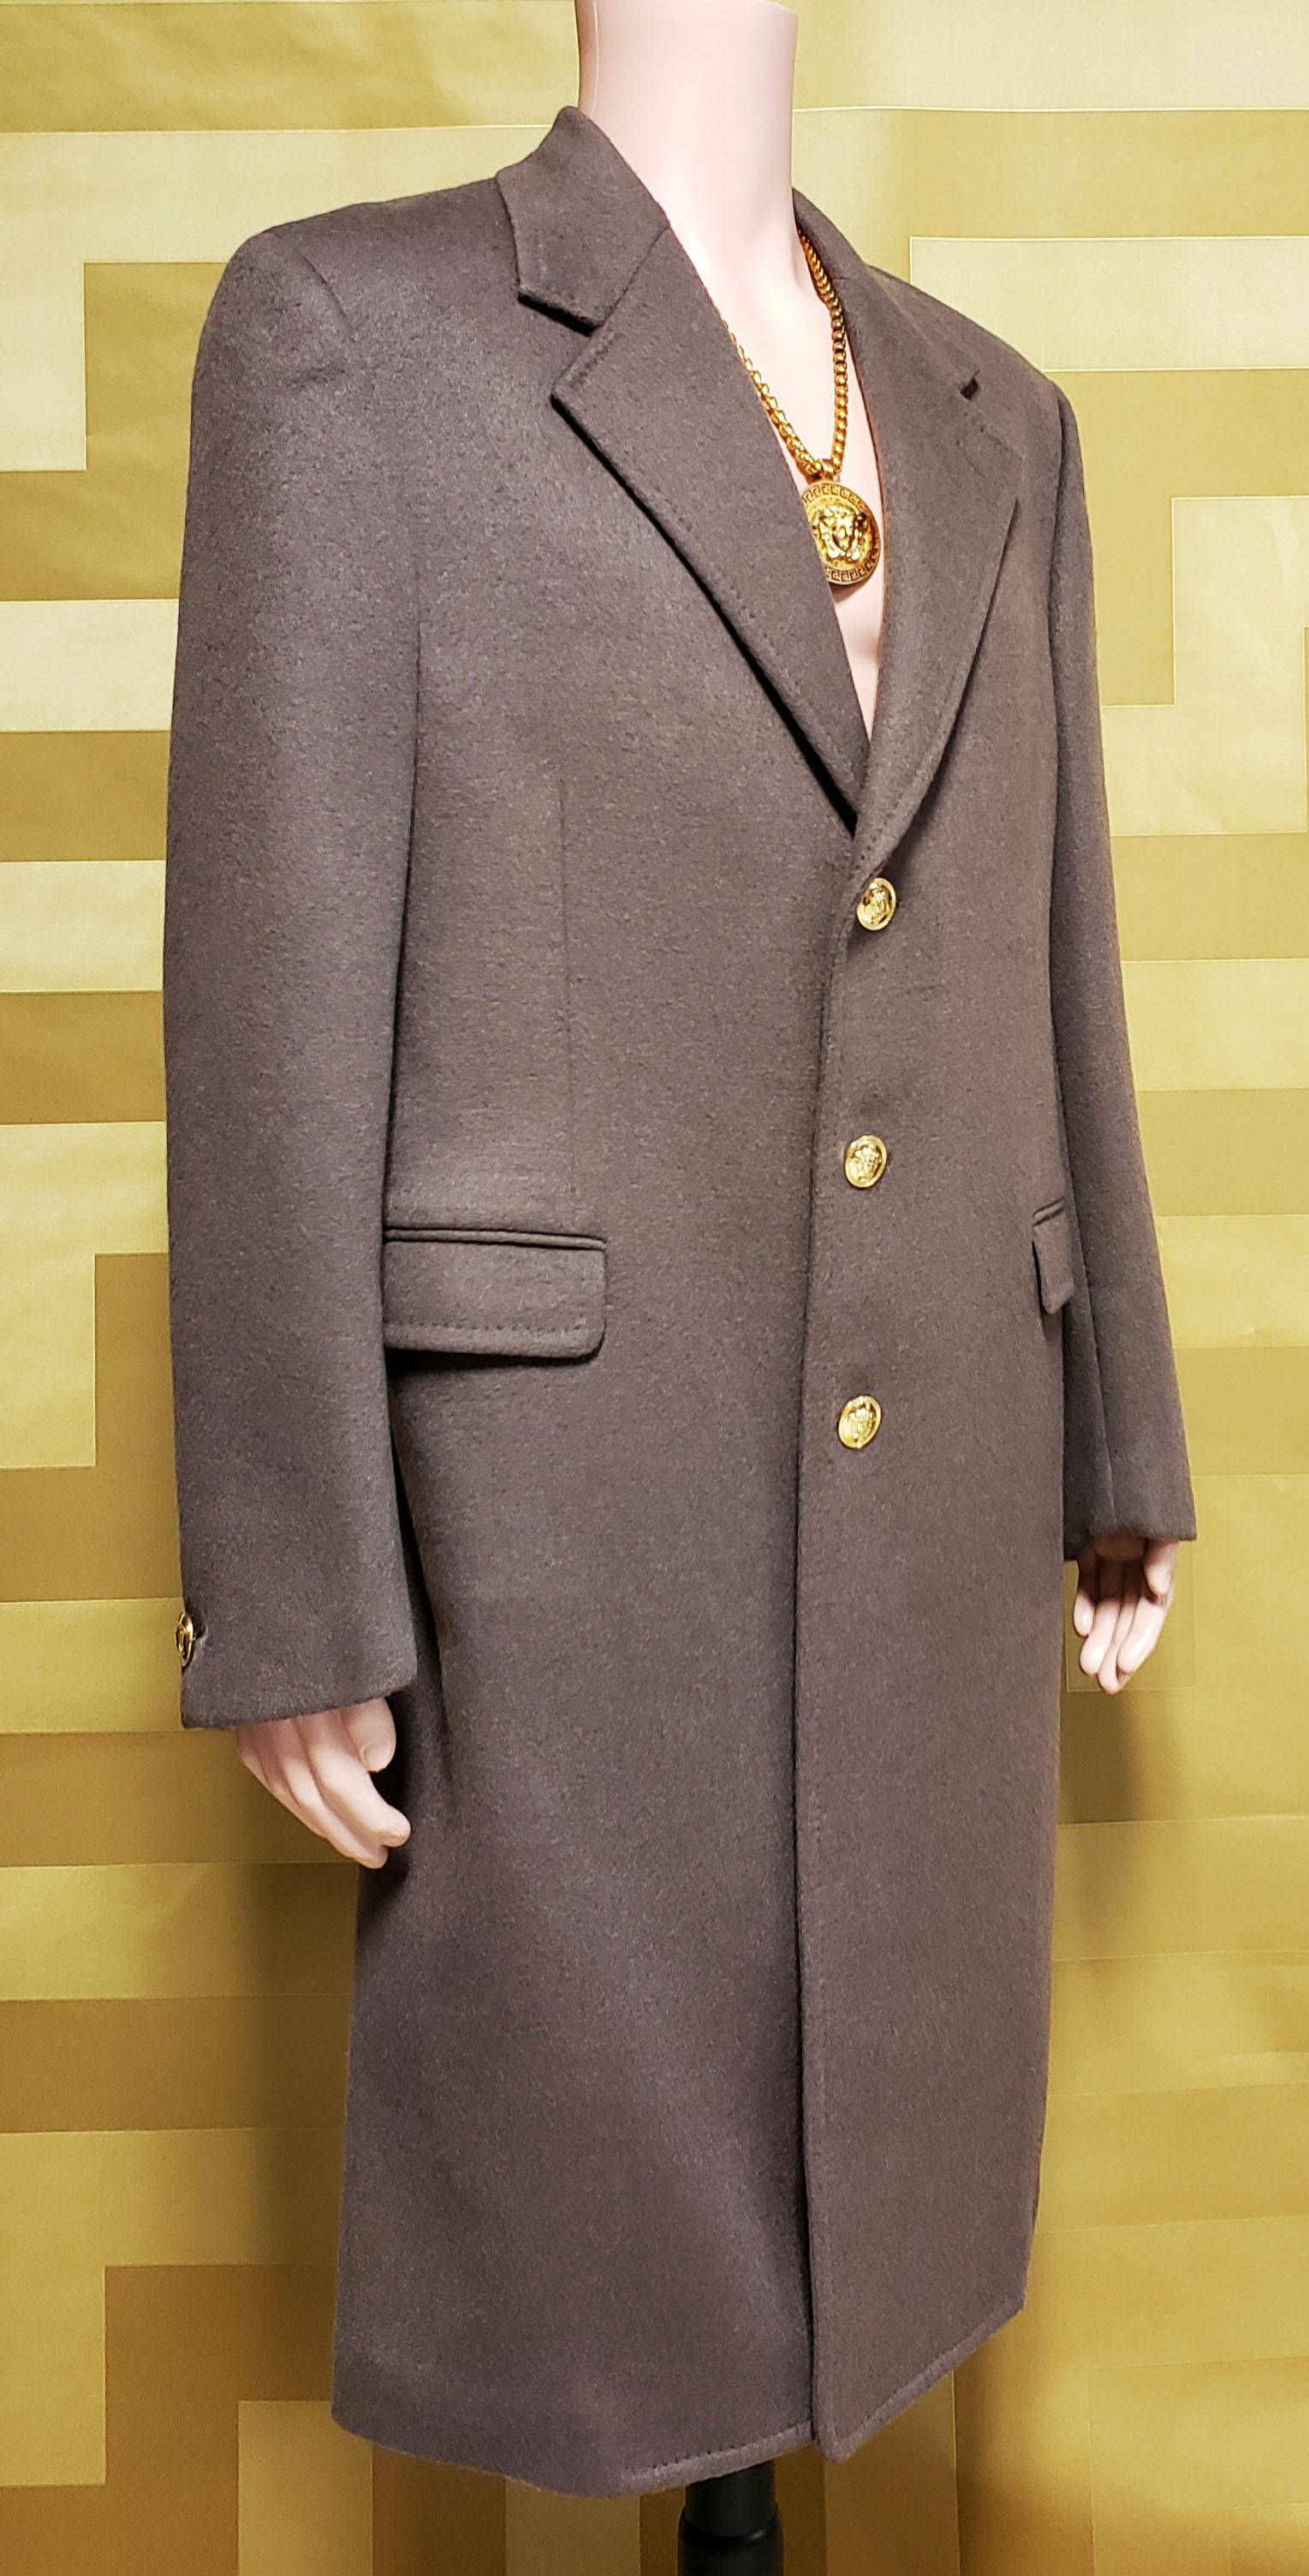 F/2015 L#2 VERSACE BROWN 100% CASHMERE COAT w/ GOLD TONE BUTTONS 50 - 40 For Sale 1